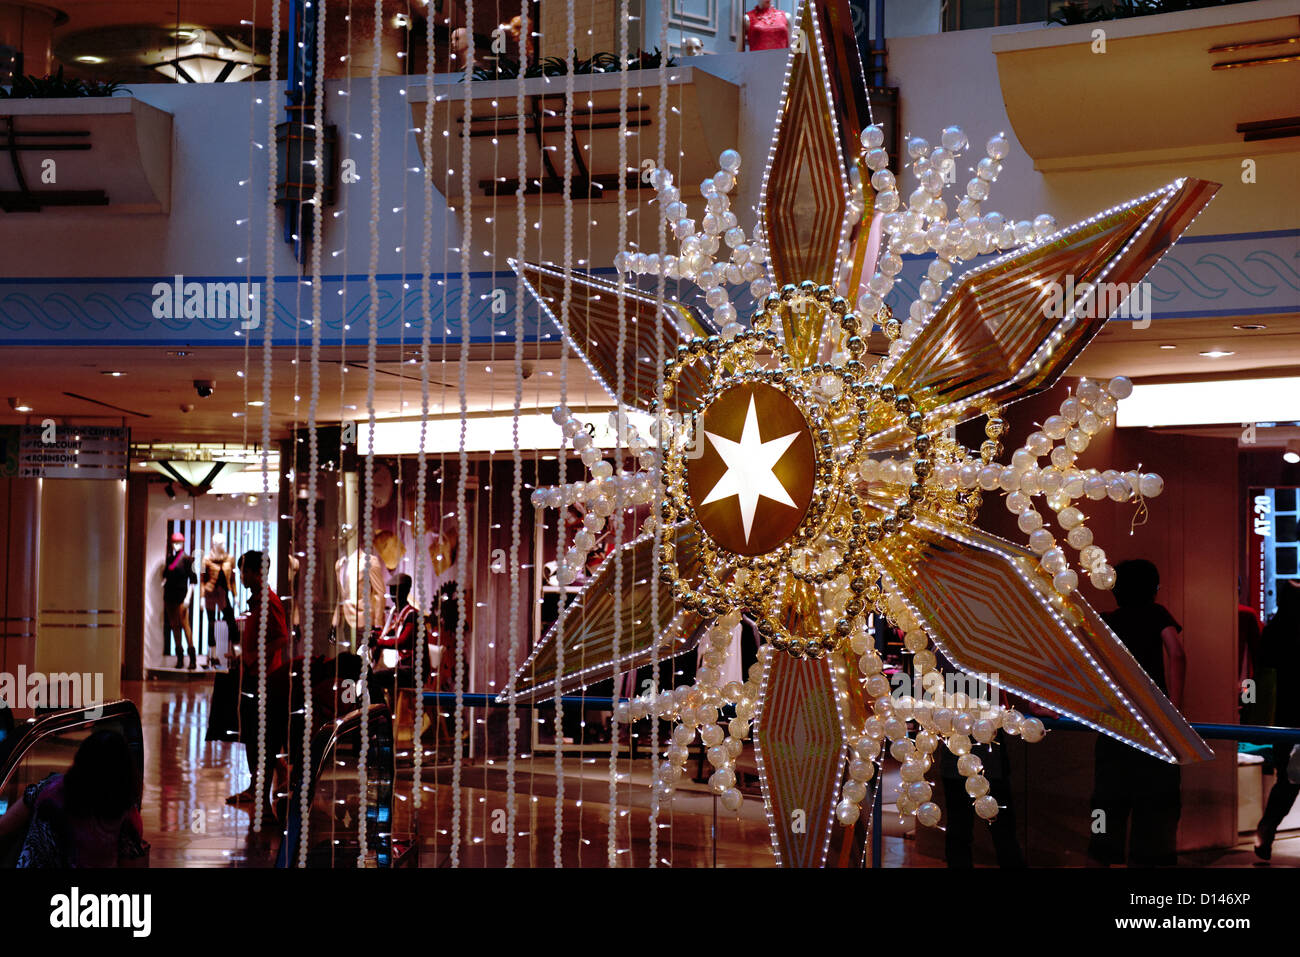 Christmas decorations in star shapes, Raffles city mall, Singapore. Stock Photo